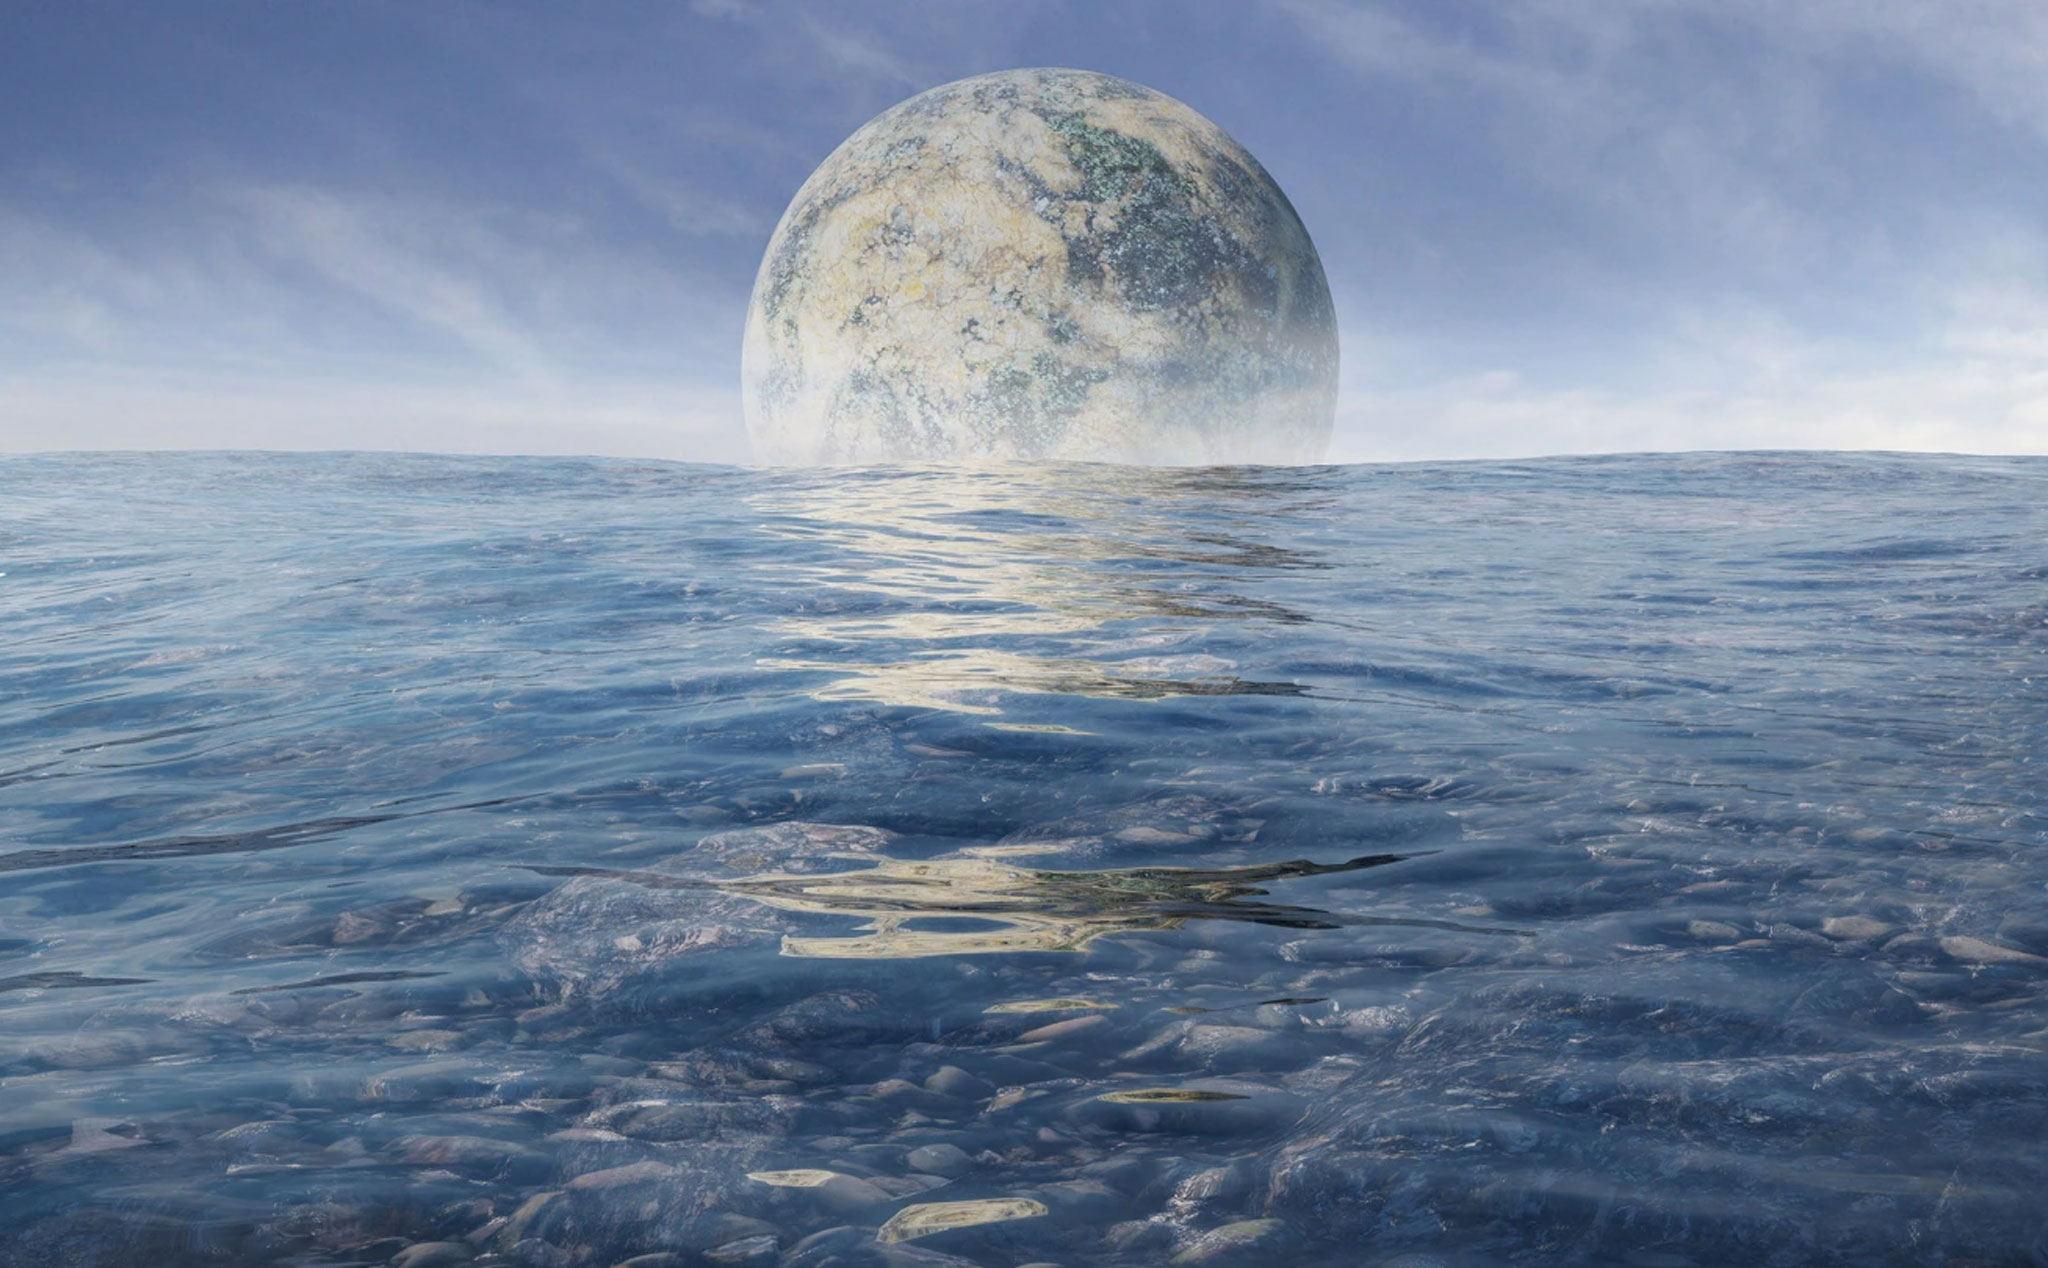 100 light years from Earth, scientists found a beautiful ocean world